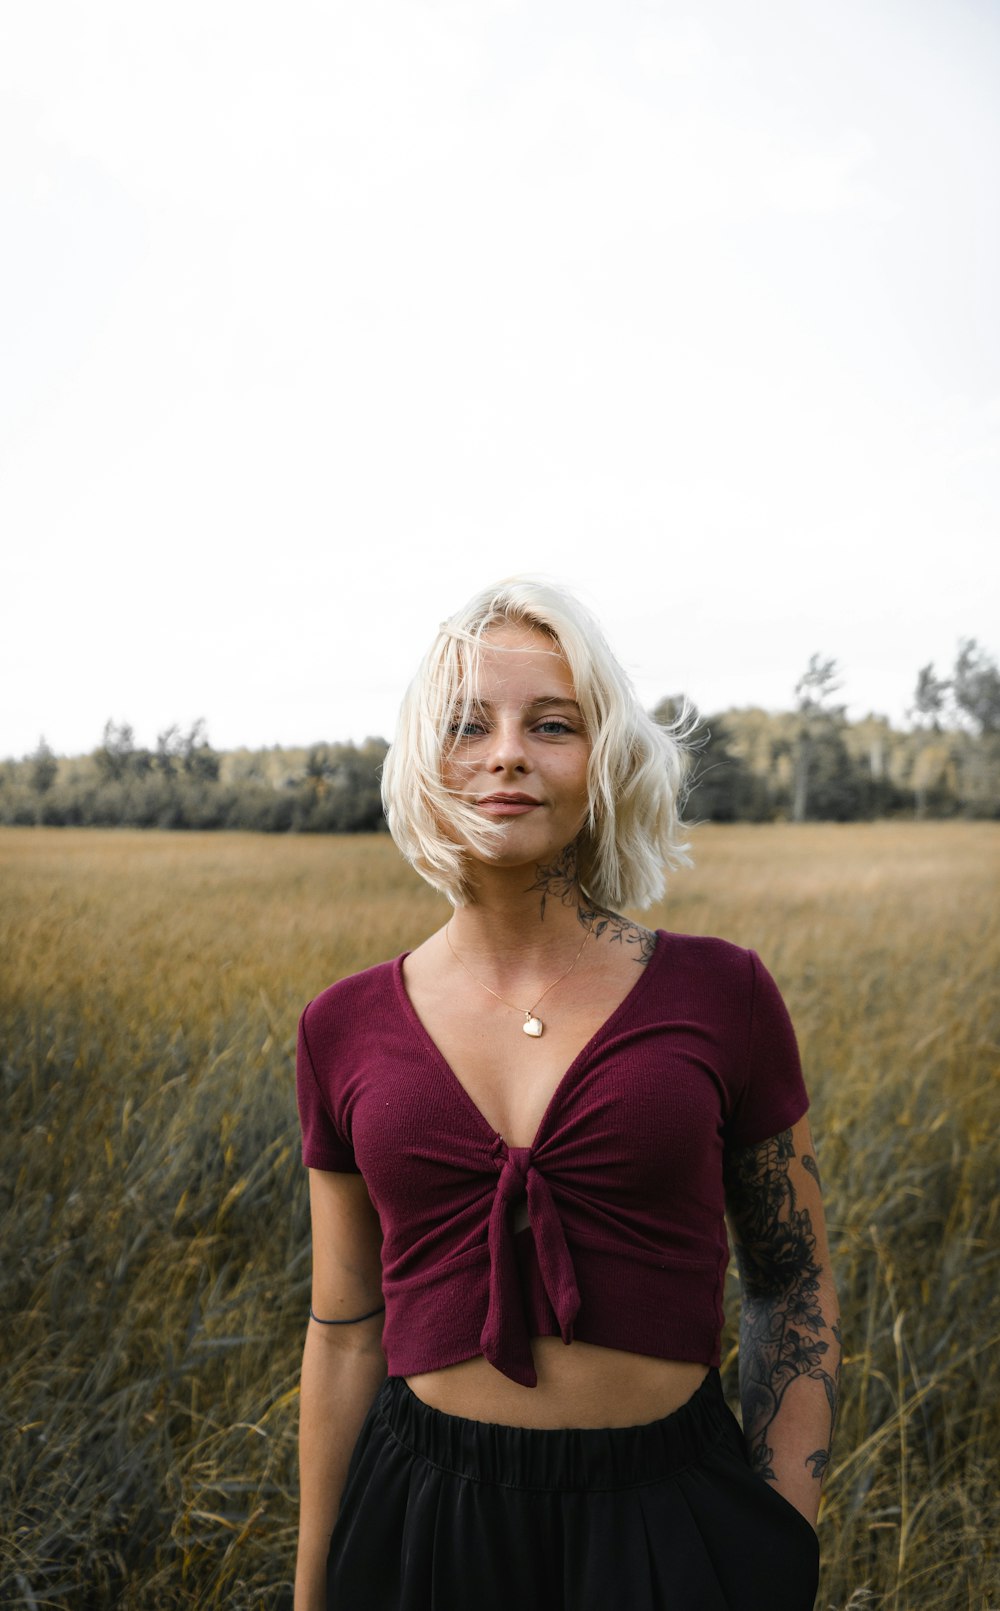 woman in red scoop neck shirt standing on brown grass field during daytime